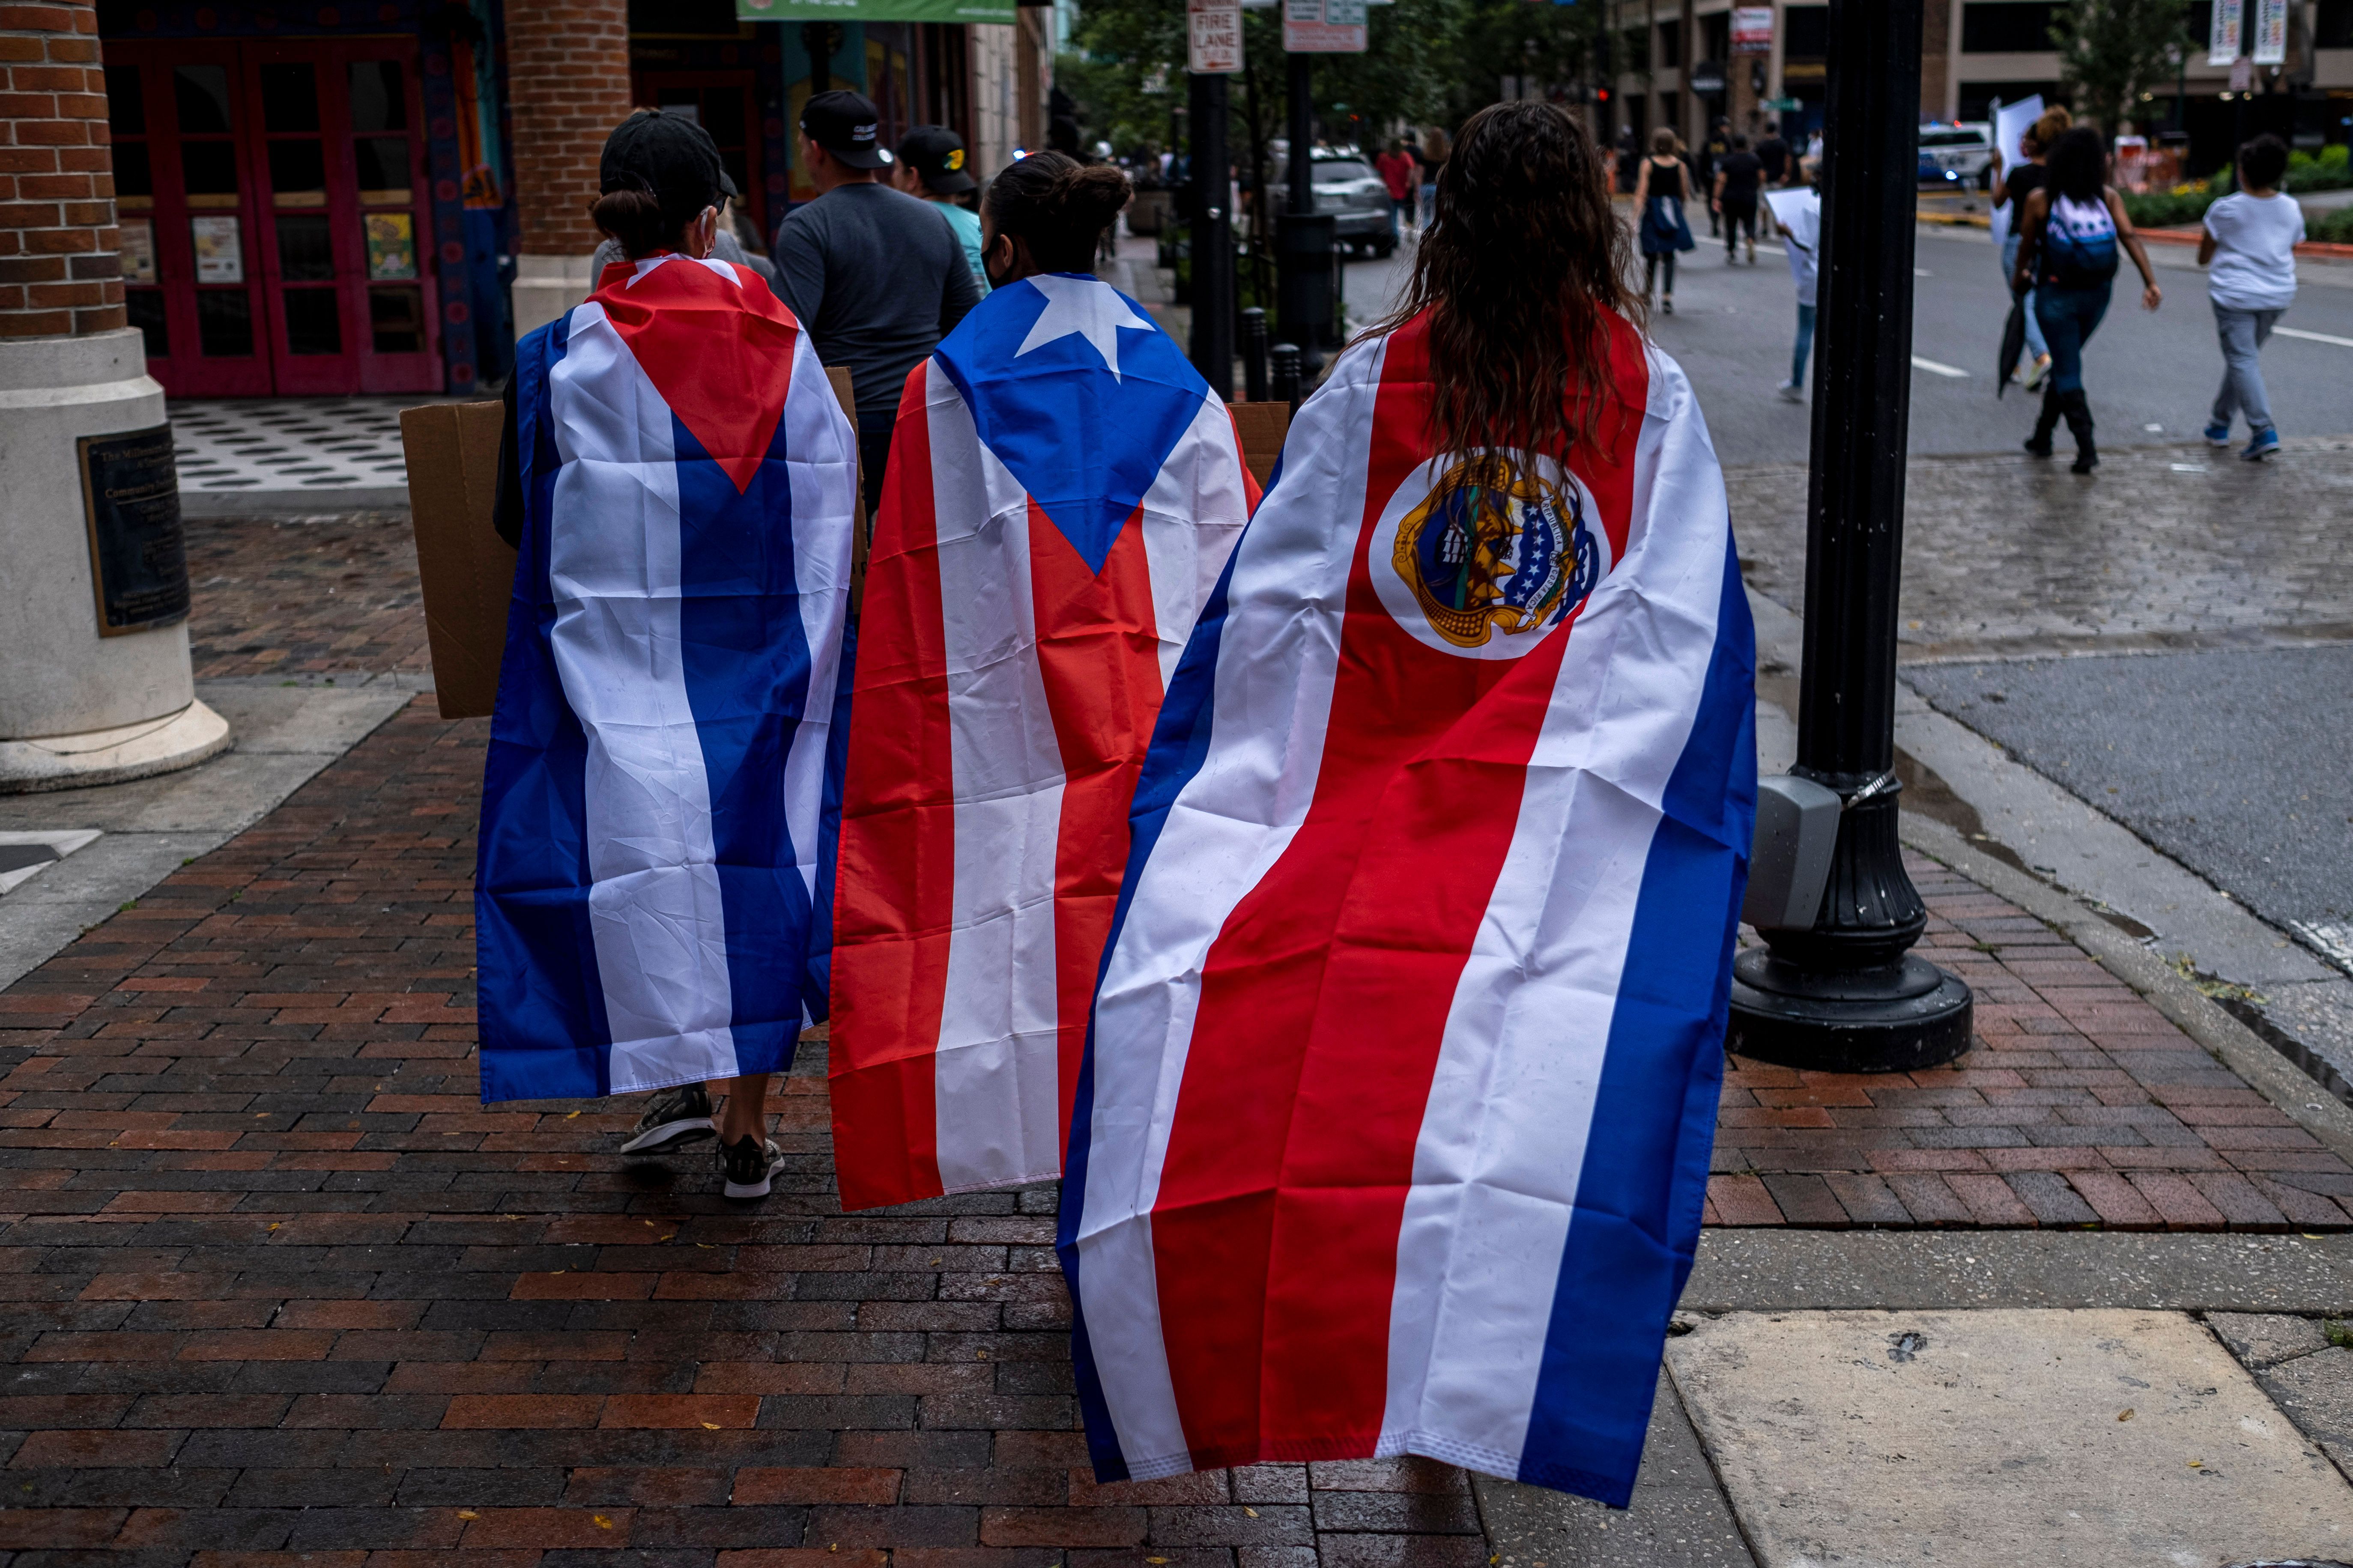 Protesters wear Cuban, Puerto Rican and Costa Rican flags during a rally in response to the death of George Floyd in police custody in Minneapolis, in Orlando, Florida.